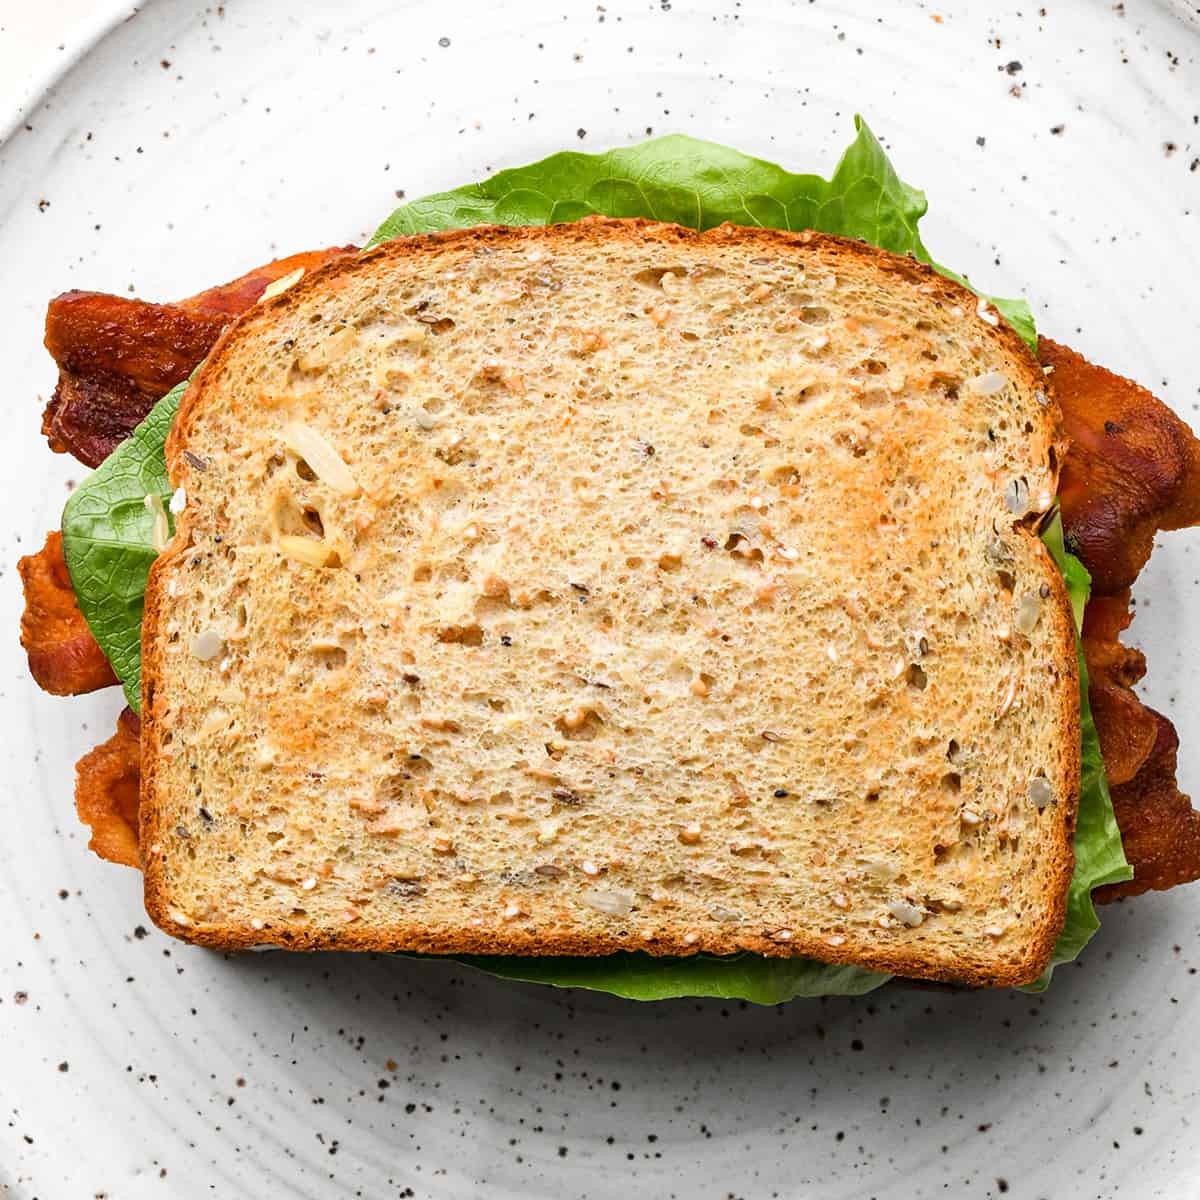 assembling a BLT sandwich - adding the top slice of bread